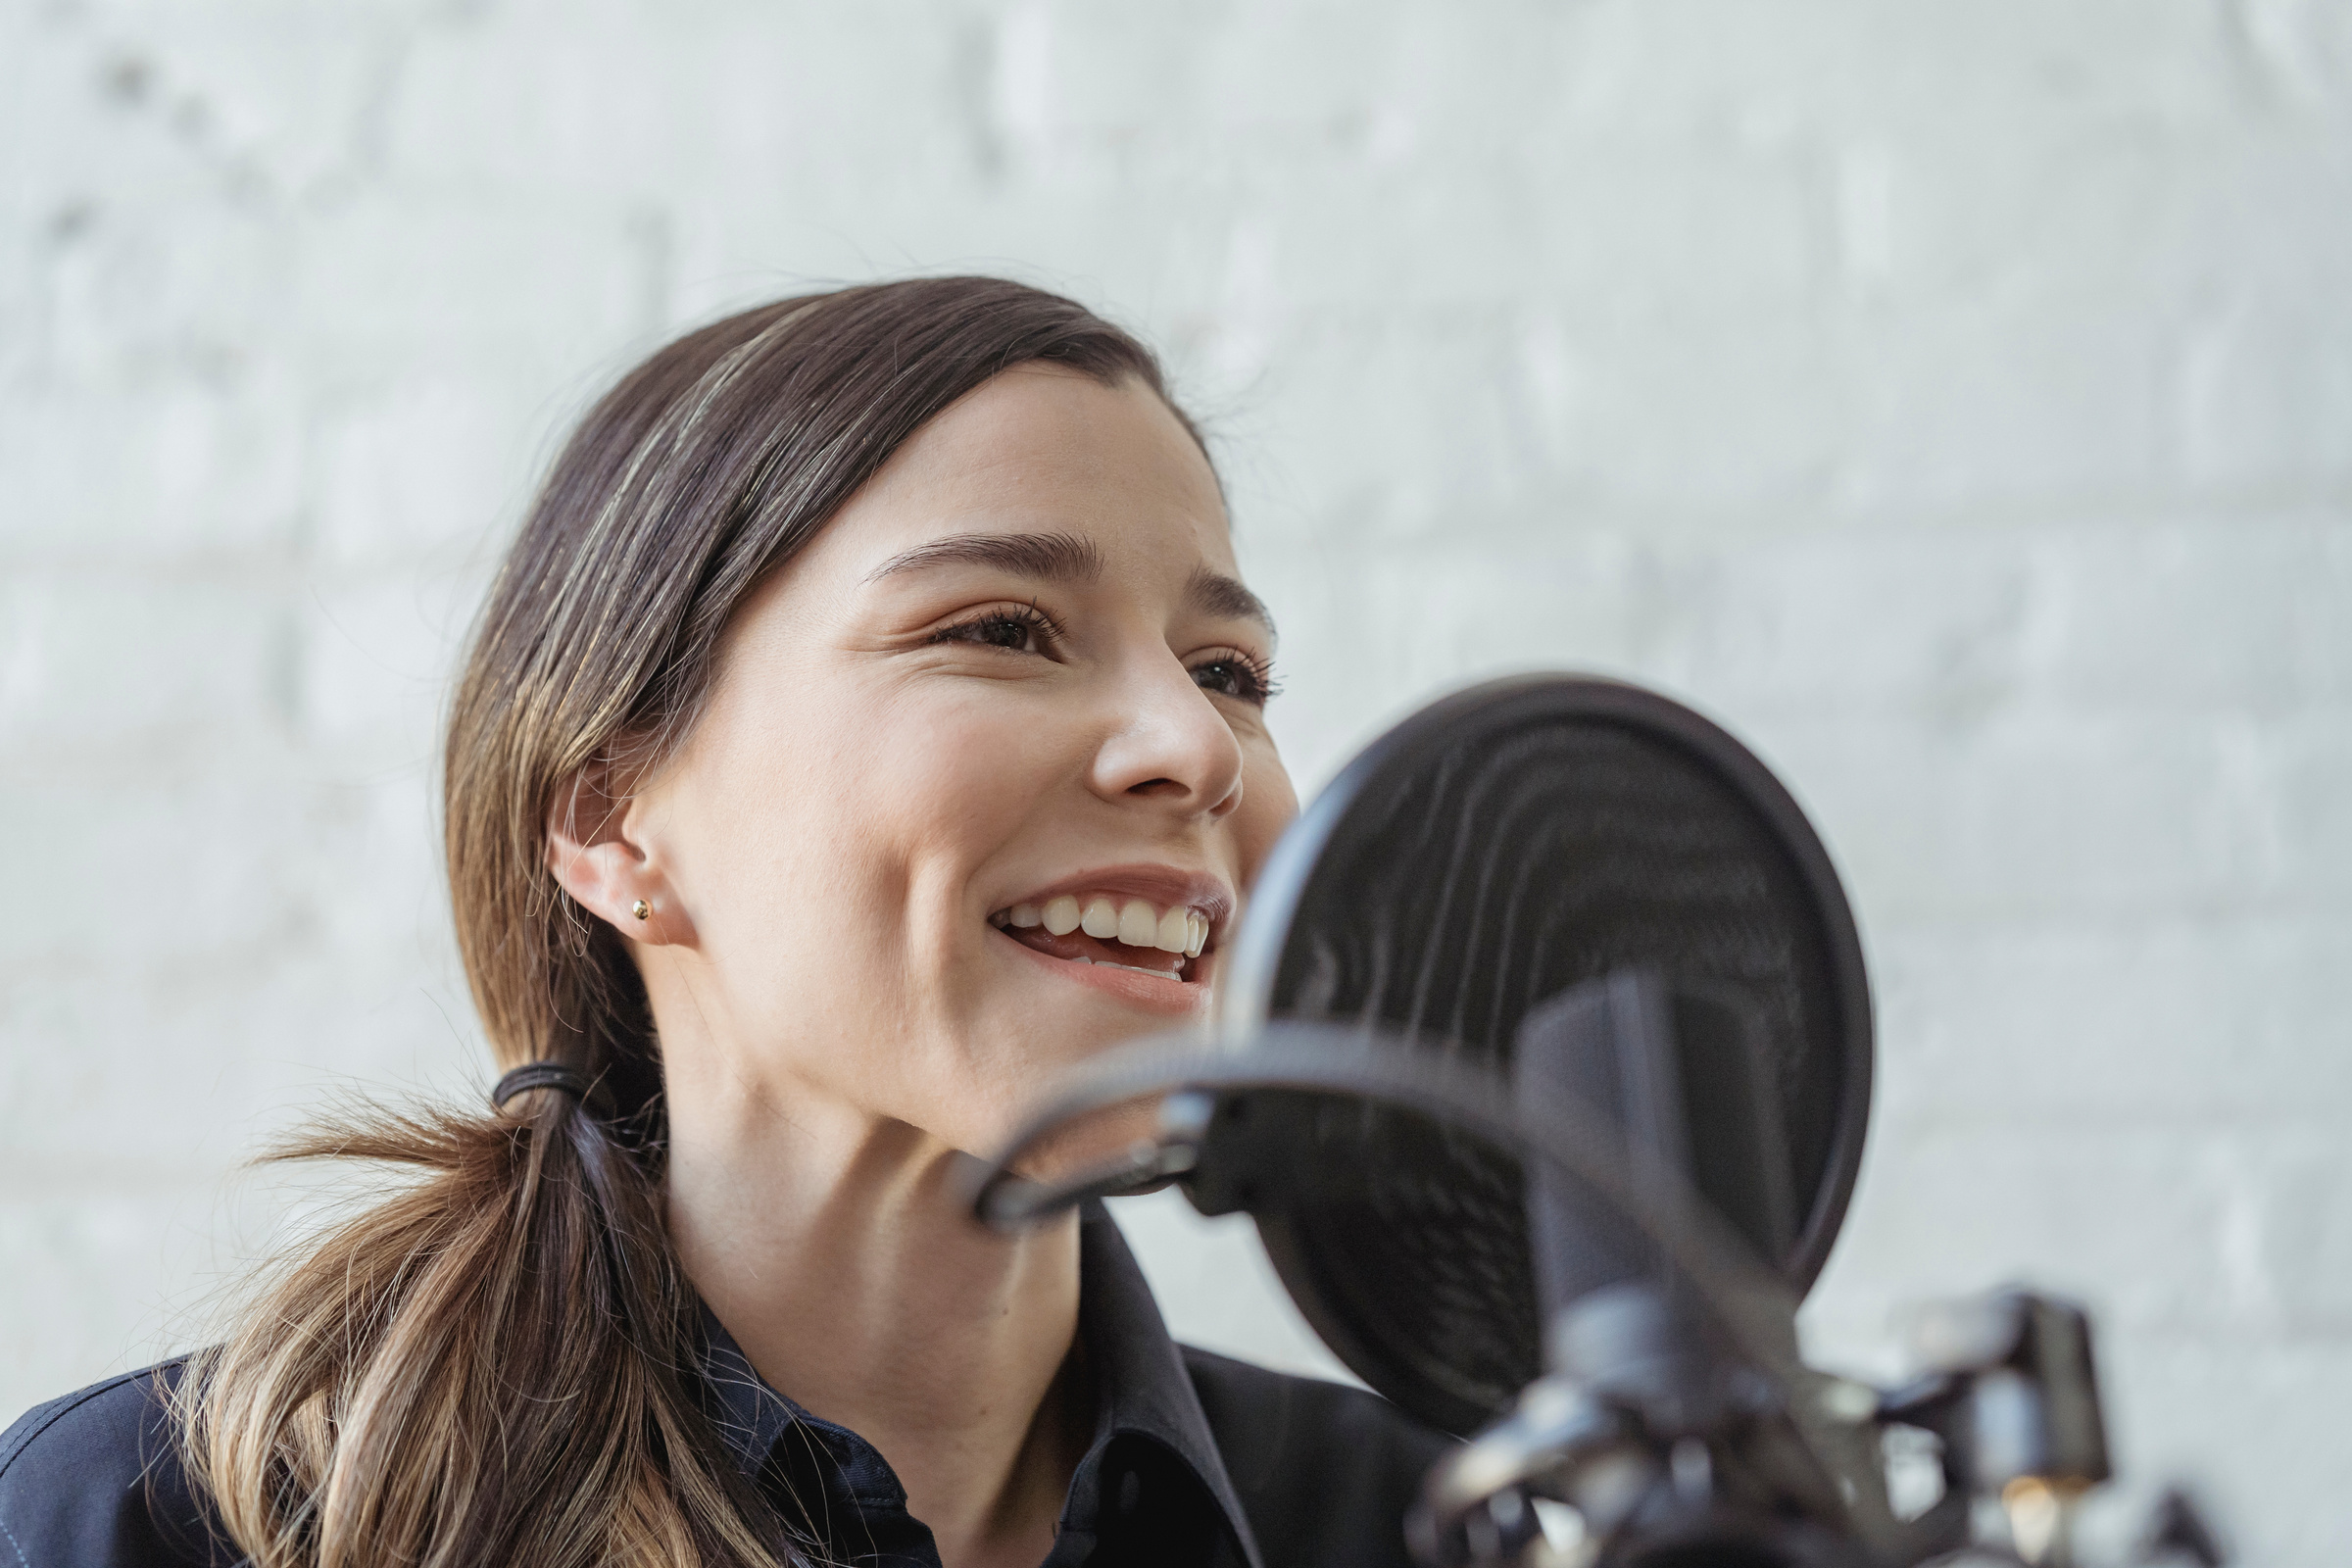 Smiling woman recording voice podcast on microphone